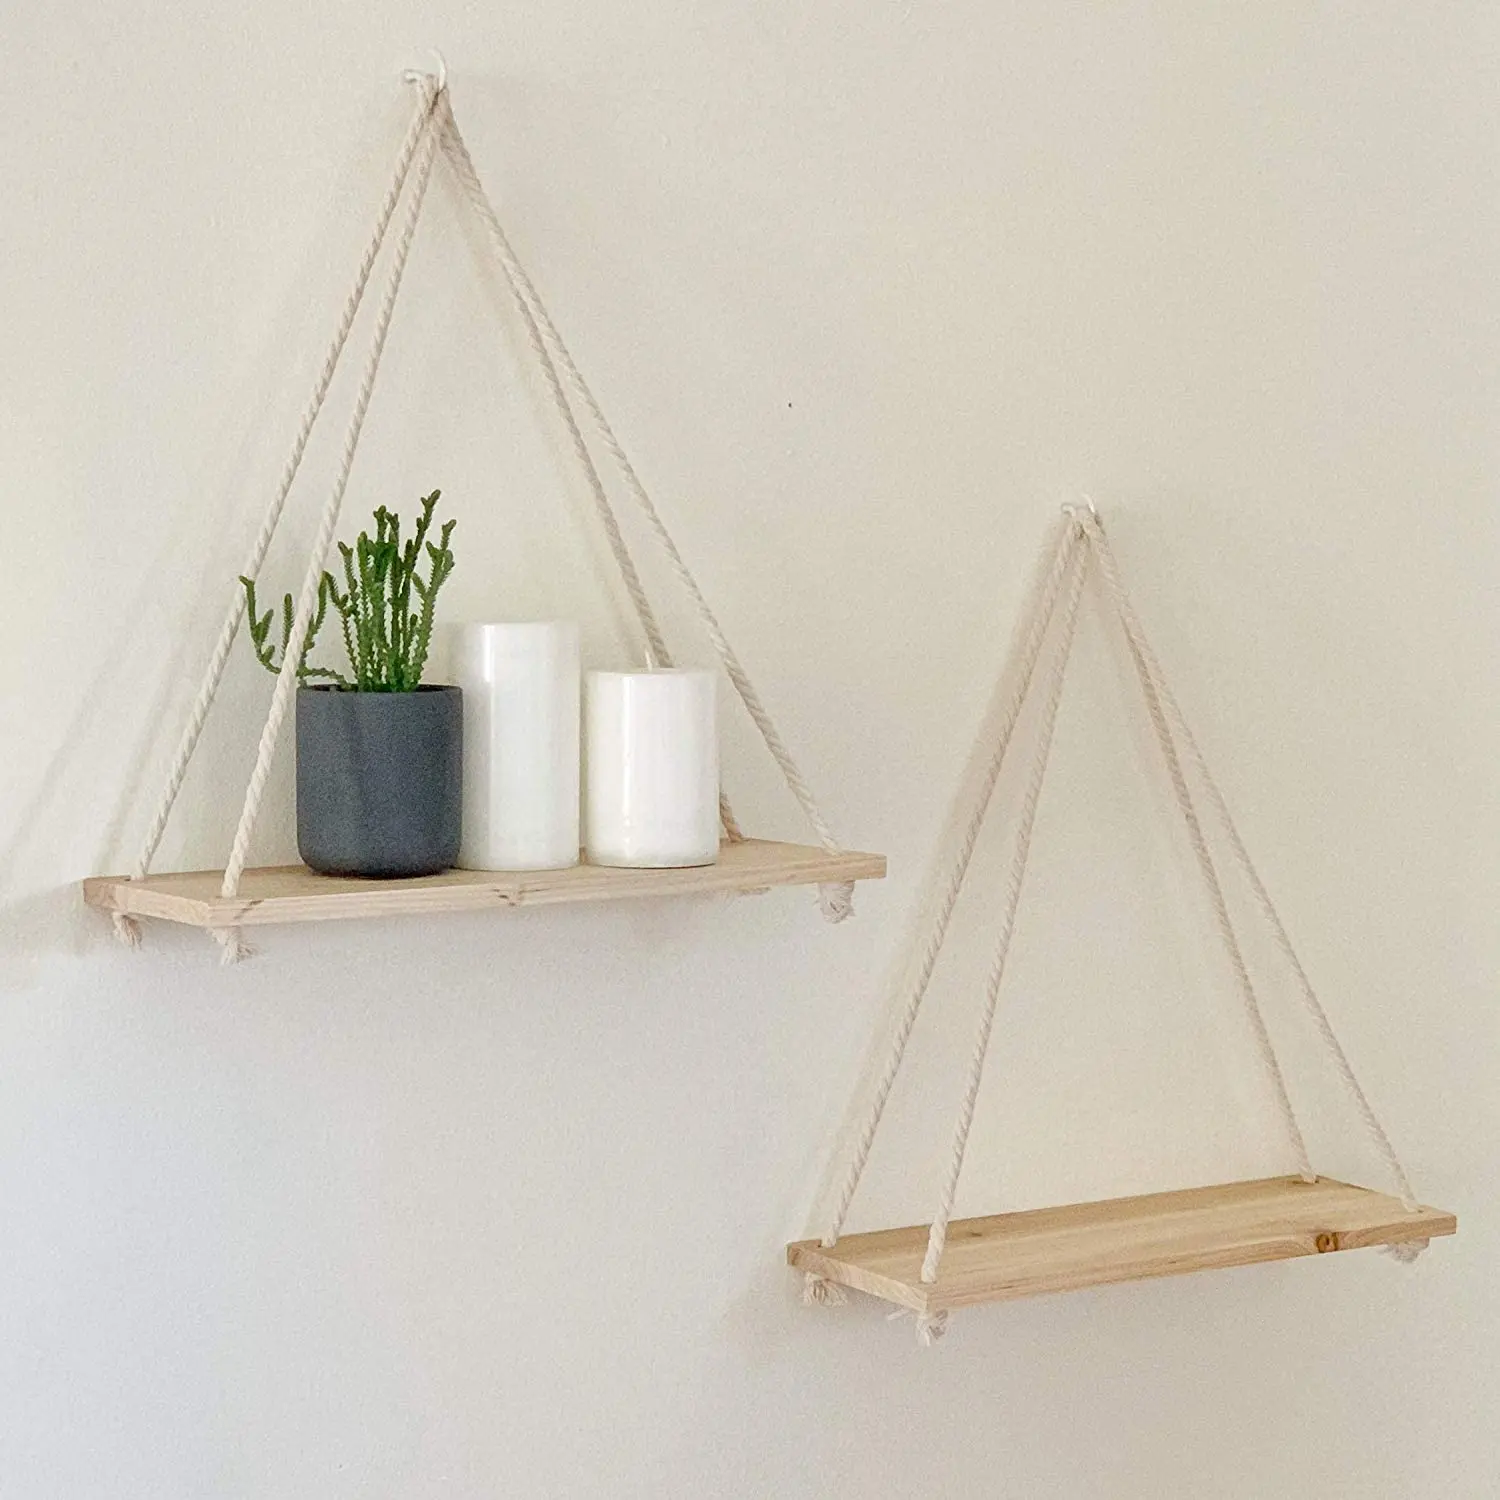 Wooden Rope Swing Wall Hanging Plant Flower Pot Tray Mounted Floating Wall Shelves Nordic Home Decoration Moredn Simple Design